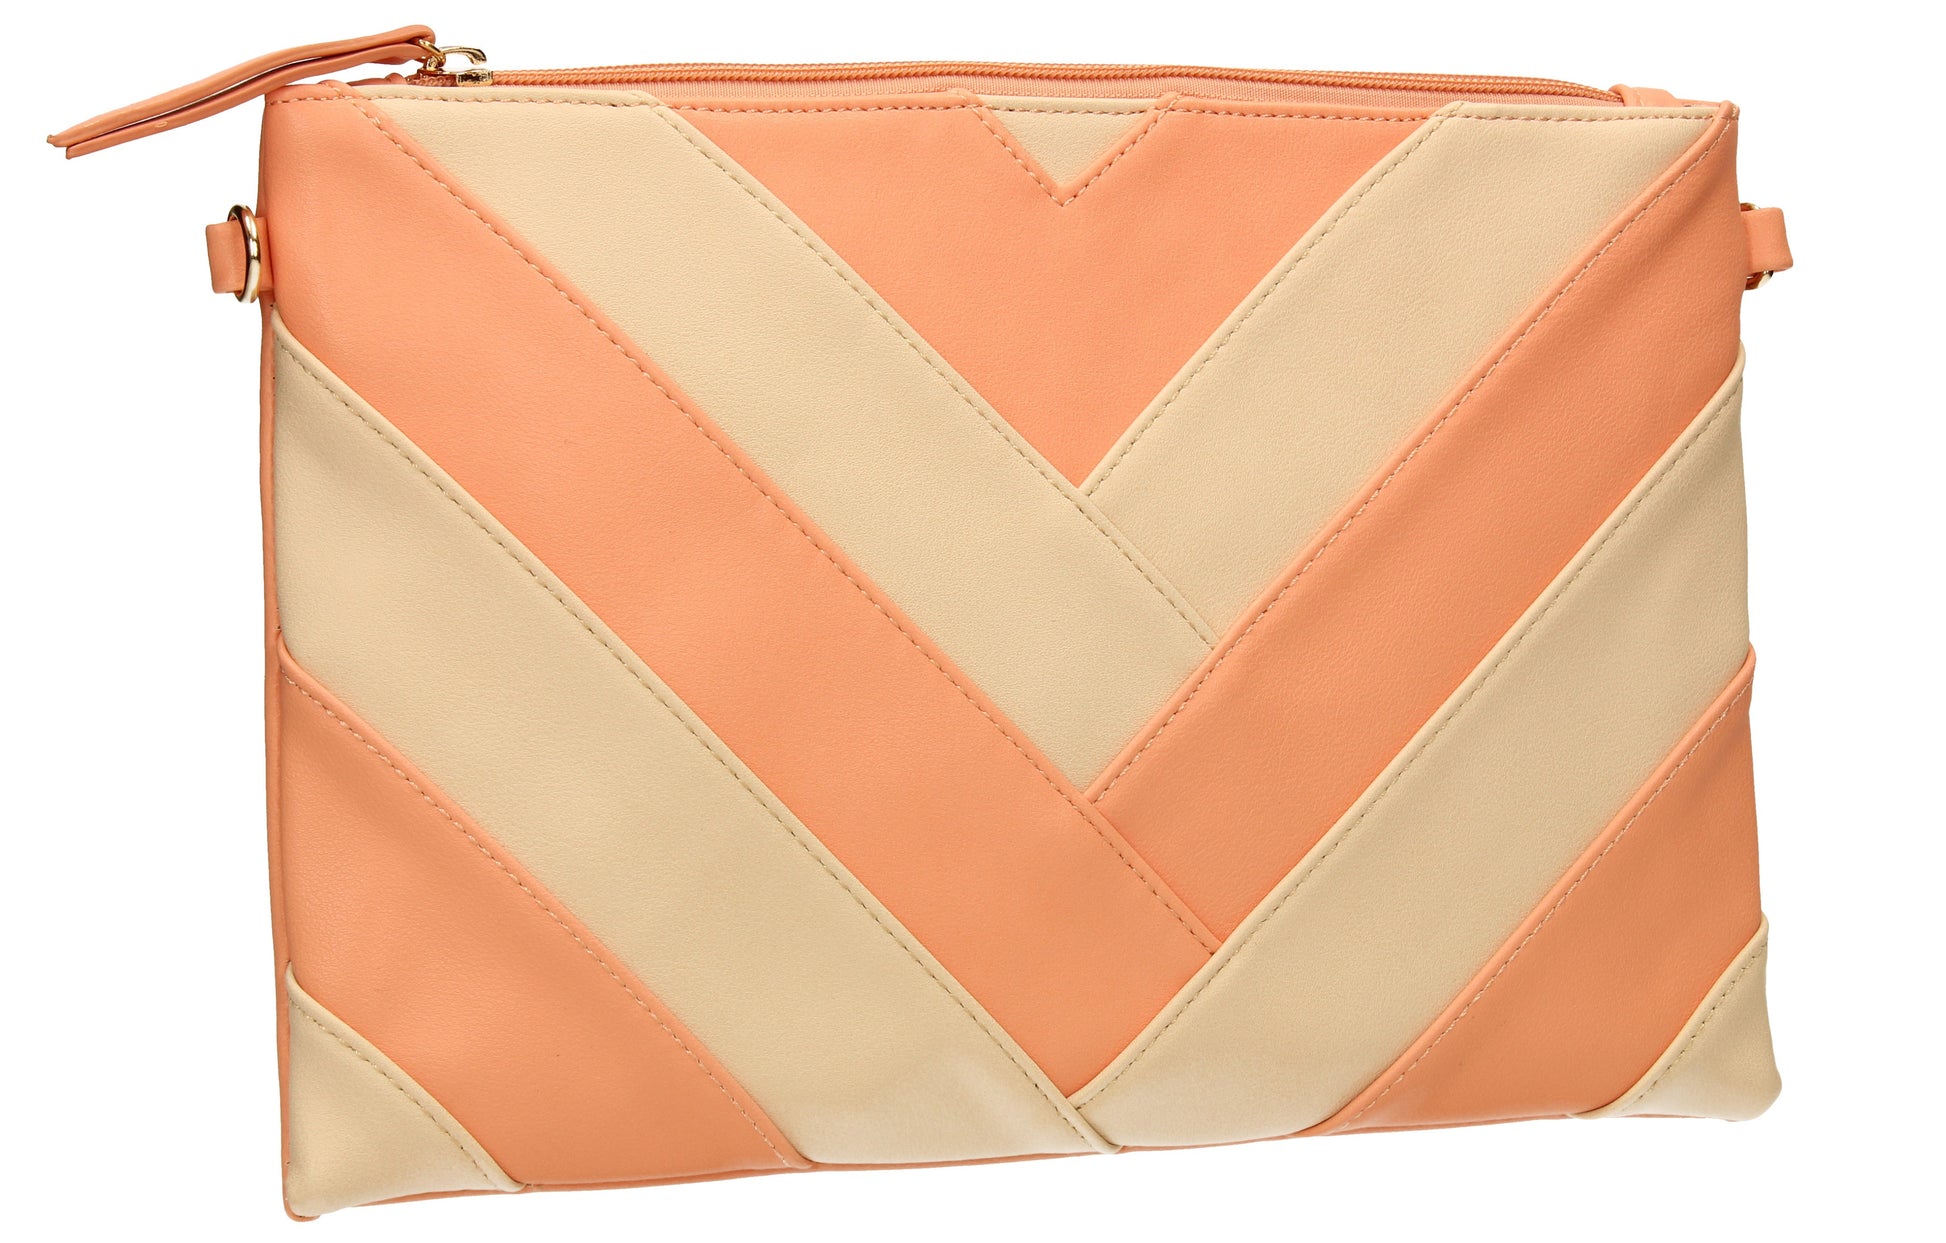 SWANKYSWANS Venice Stripes Clutch Bag Pink Cute Cheap Clutch Bag For Weddings School and Work